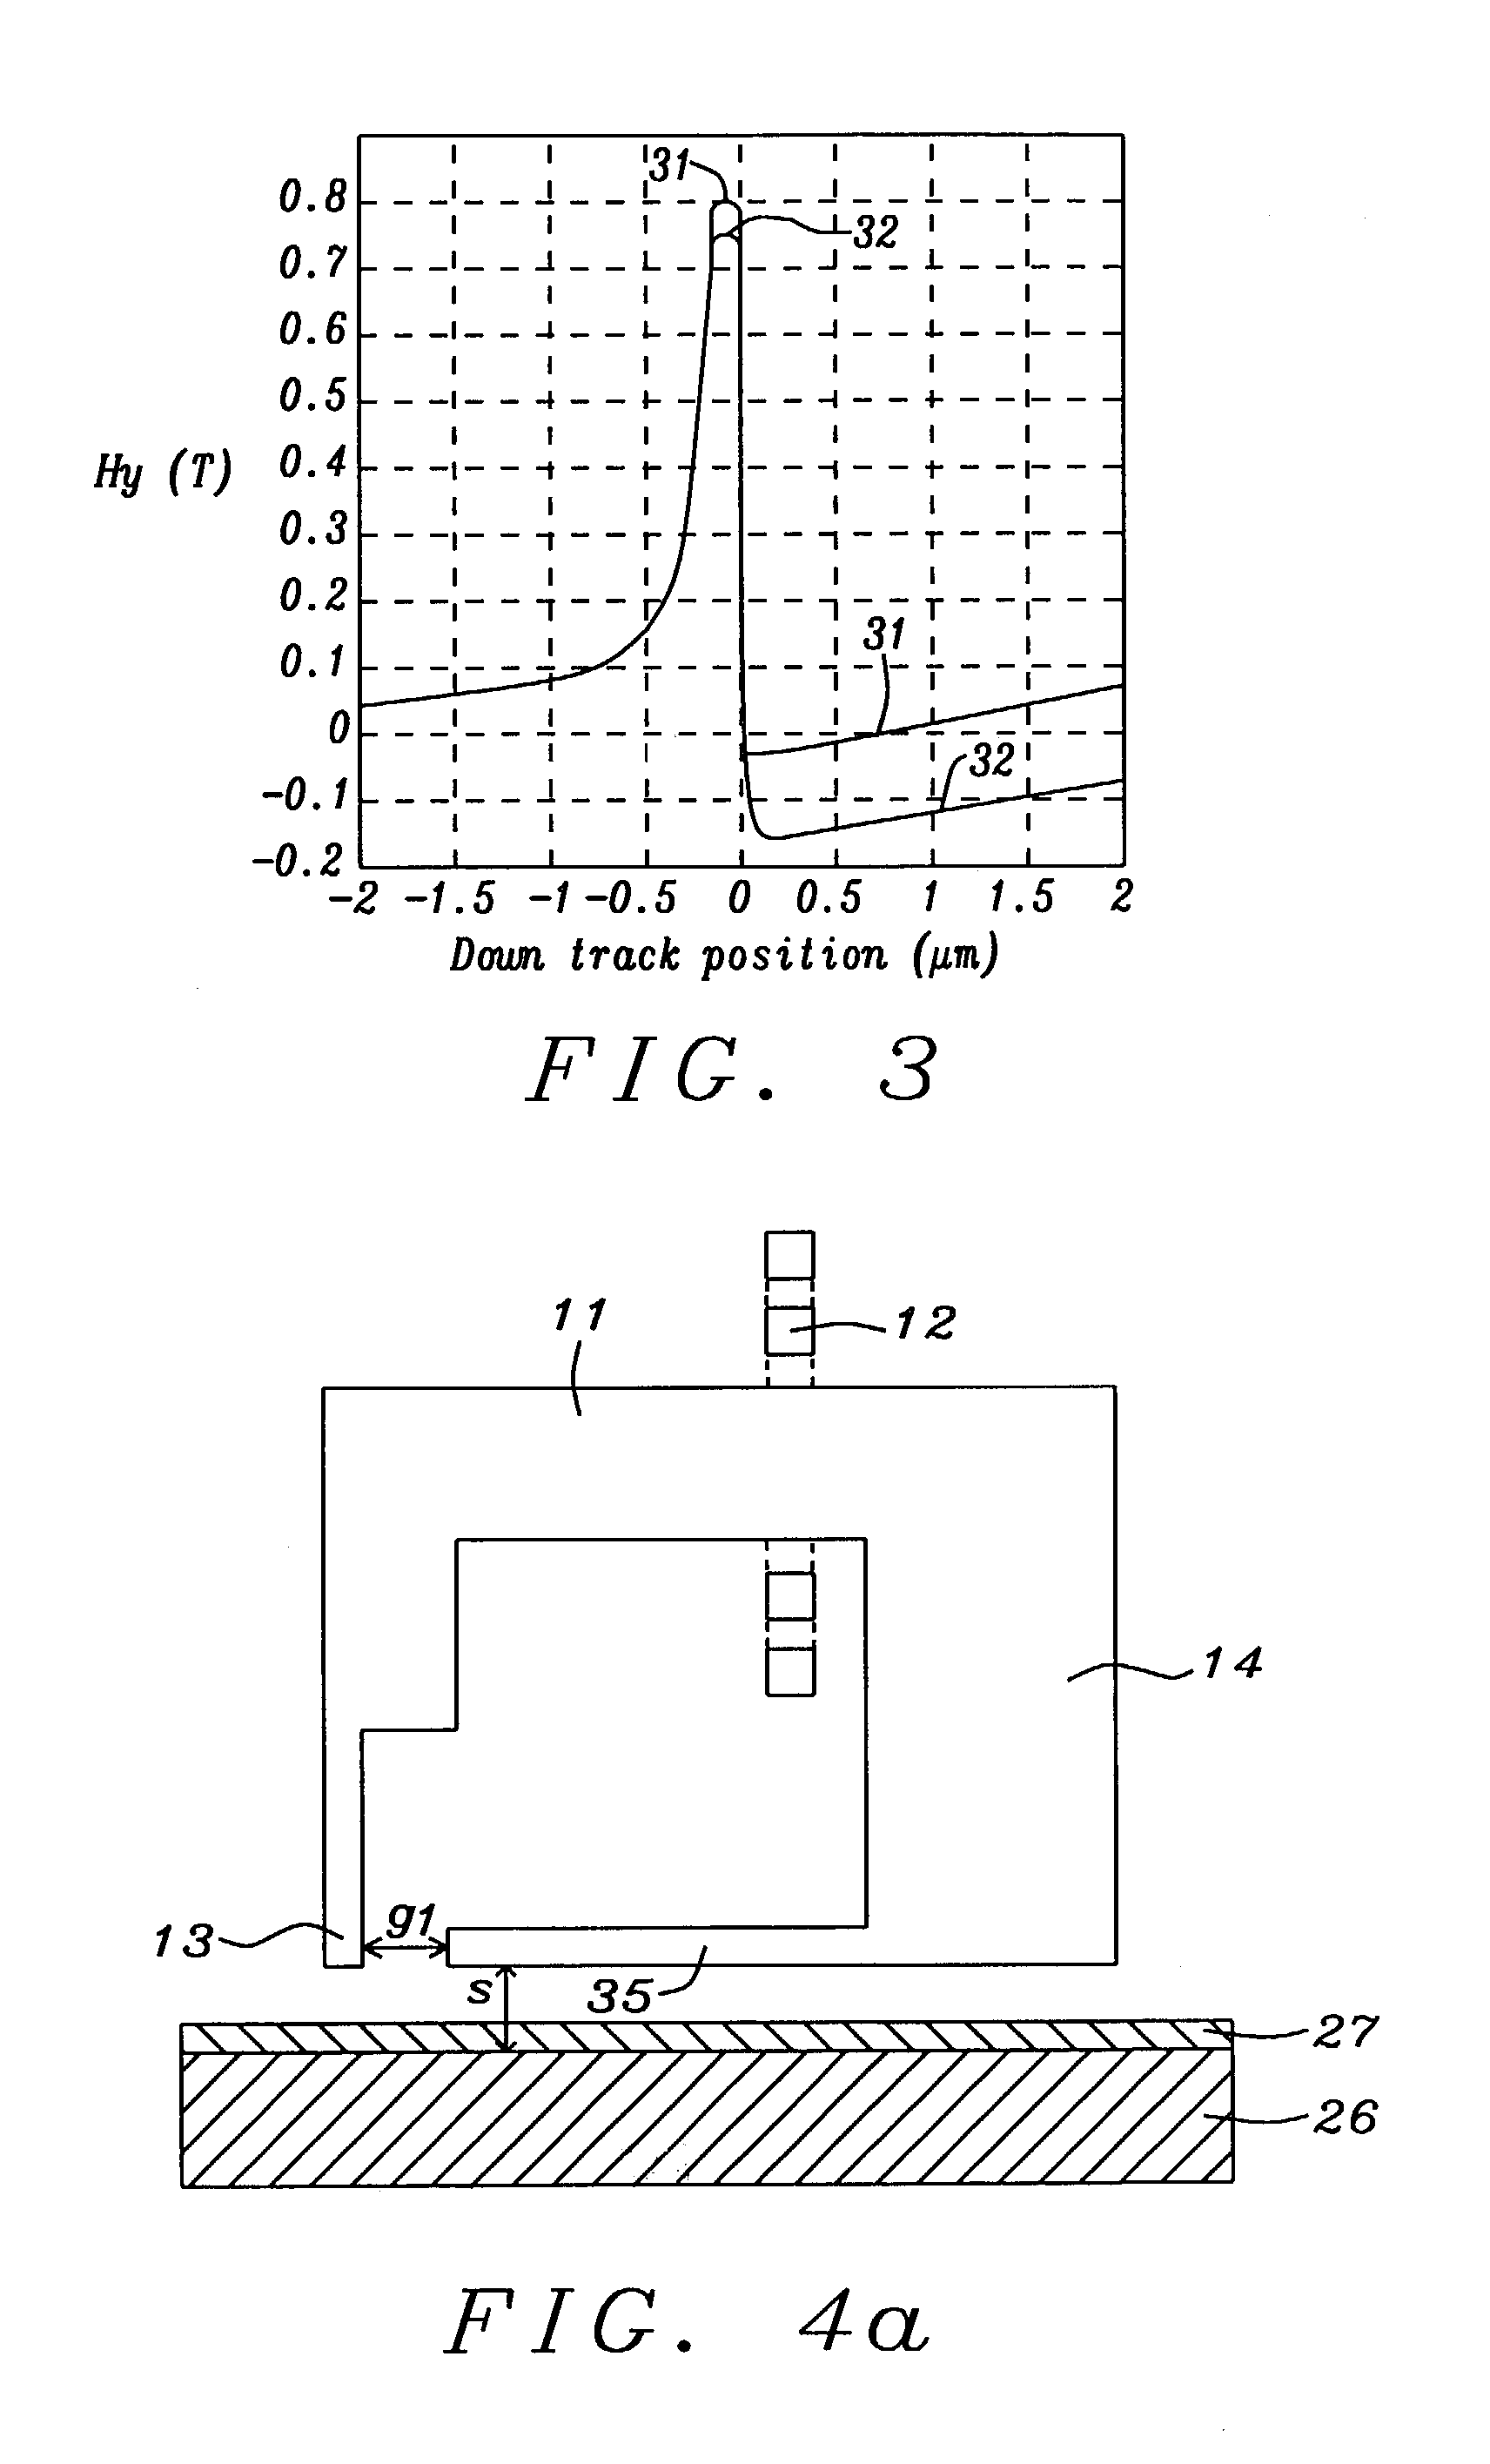 Perpendicular magnetic writer with magnetic potential control shield